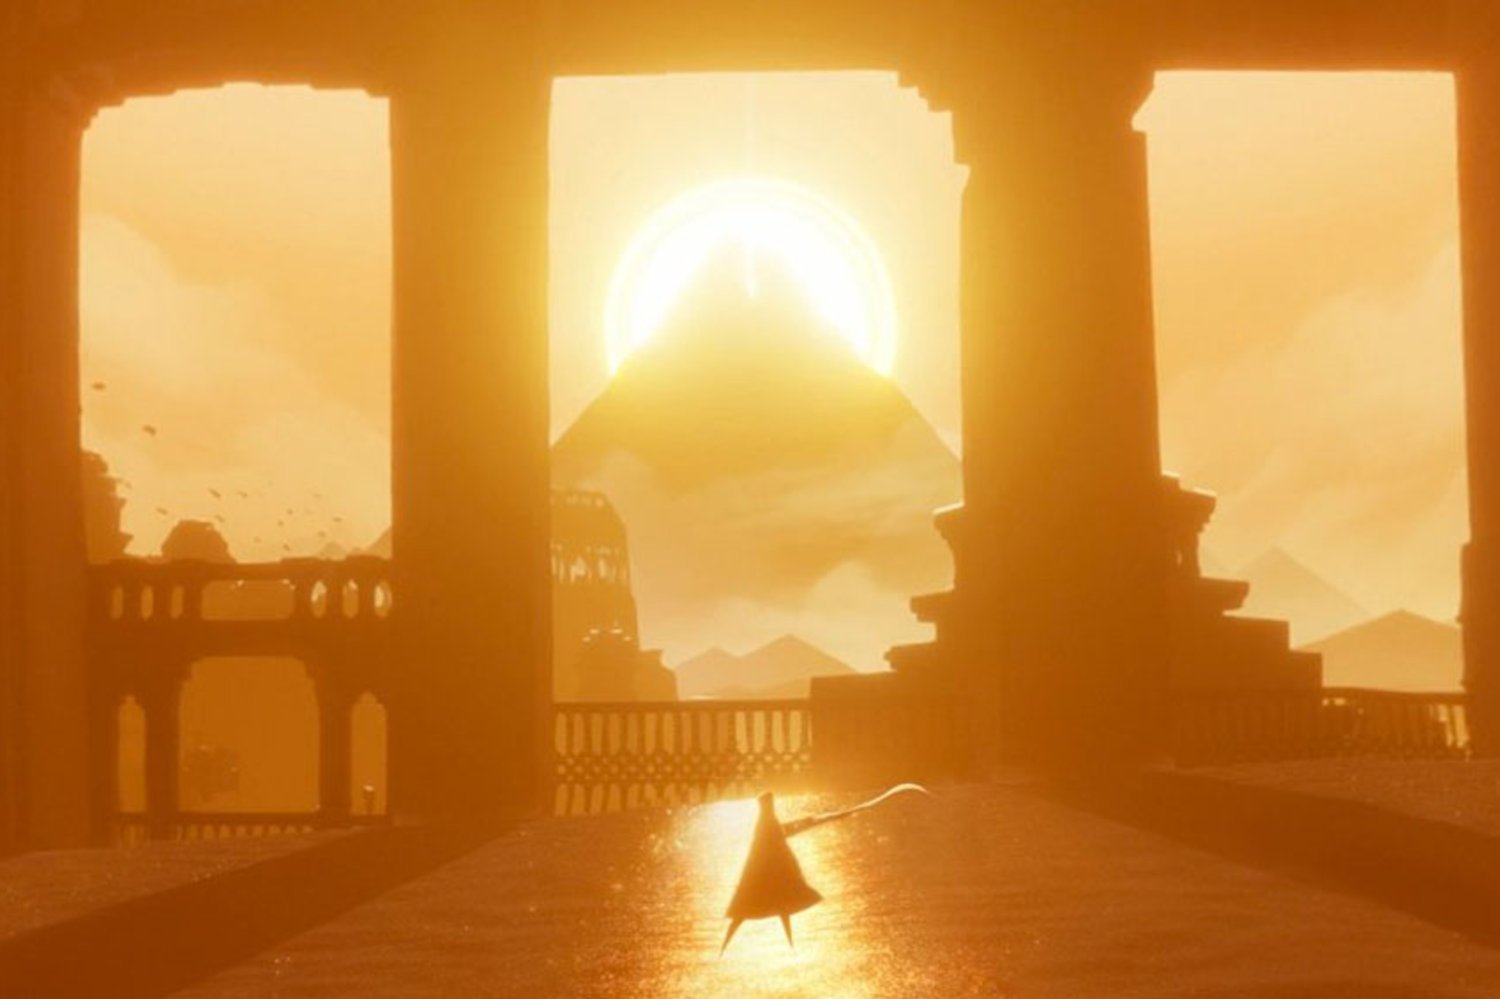 Journey on PS3 is exquisitely beautiful aesthetically, but does that make it a more worthy candidate for the artistic label?